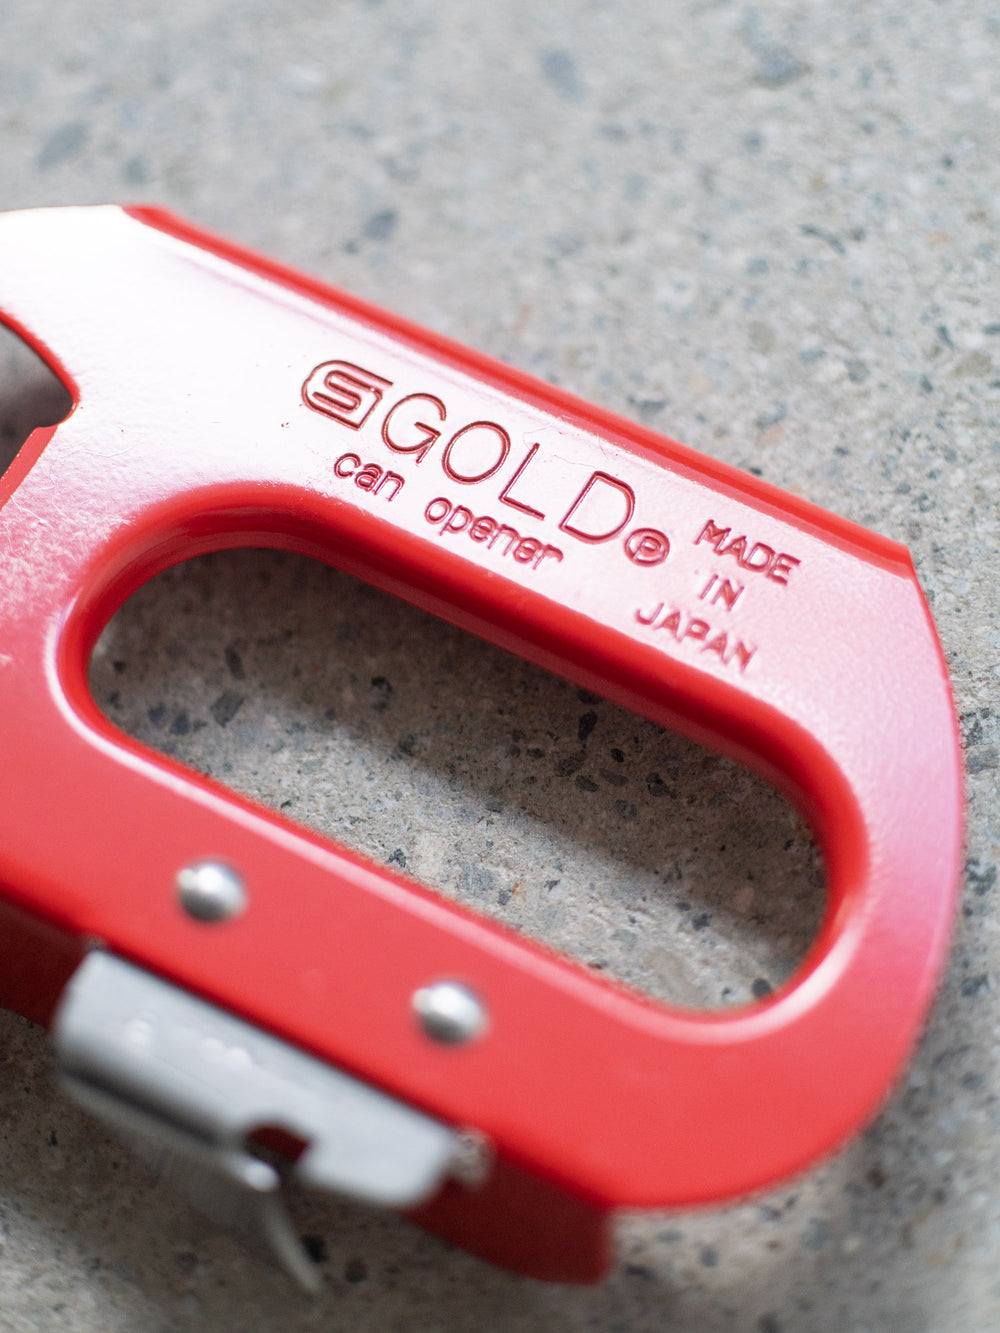 GOLD Can Opener - Red